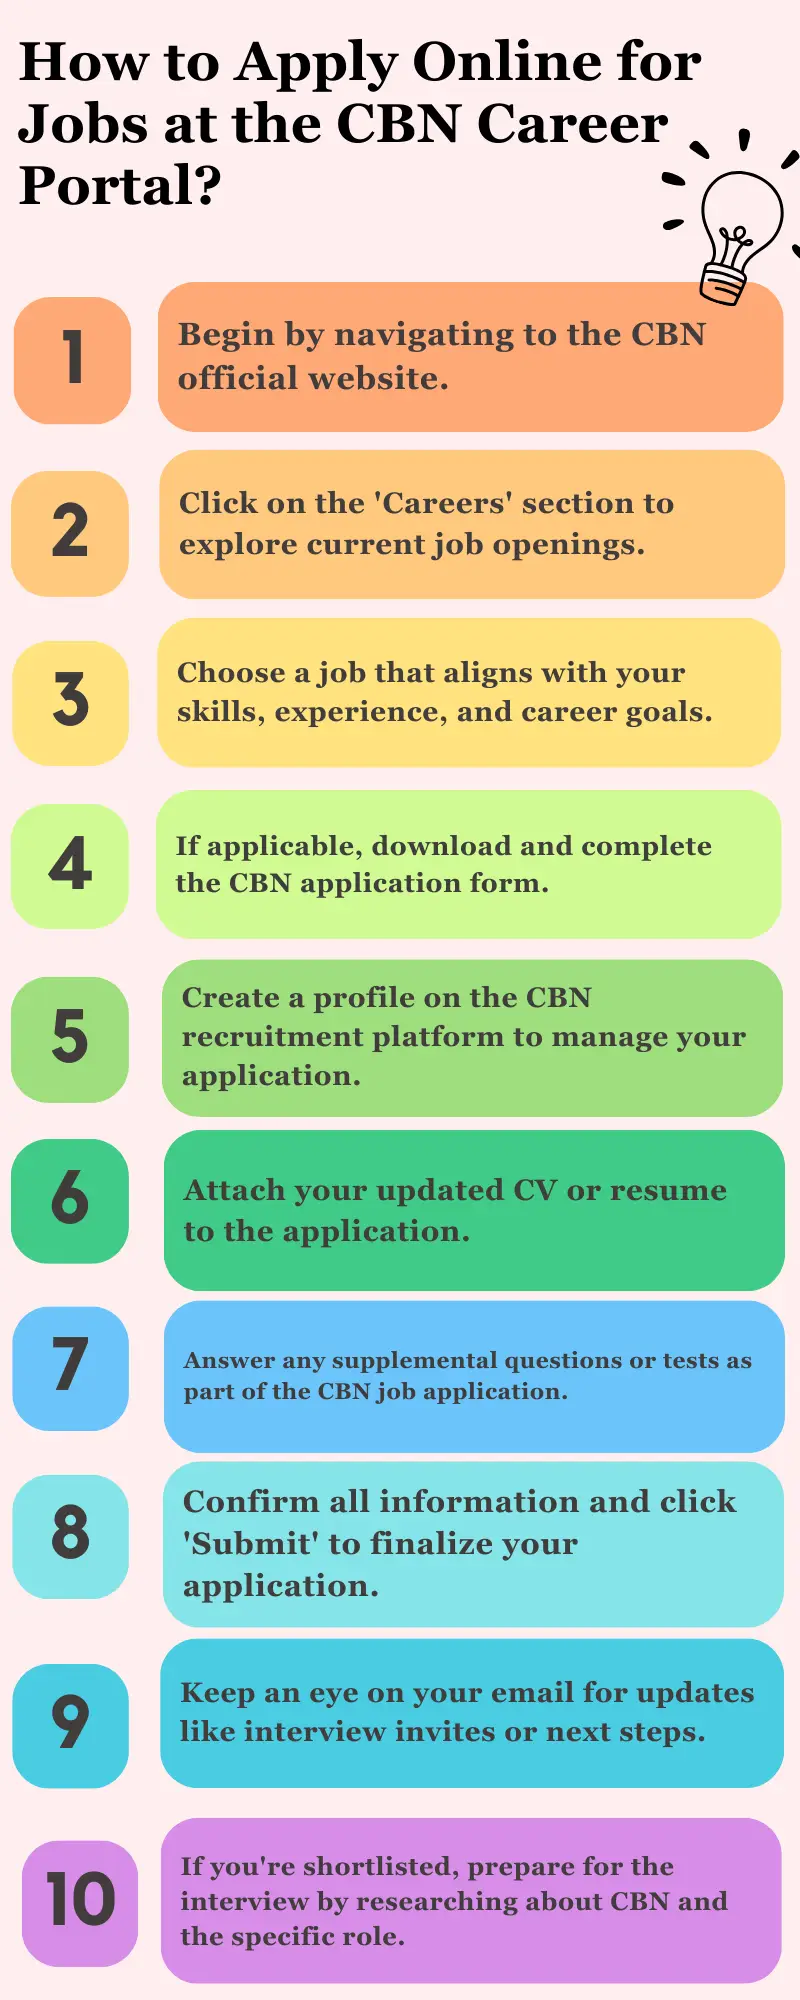 How to Apply Online for Jobs at the CBN Career Portal?